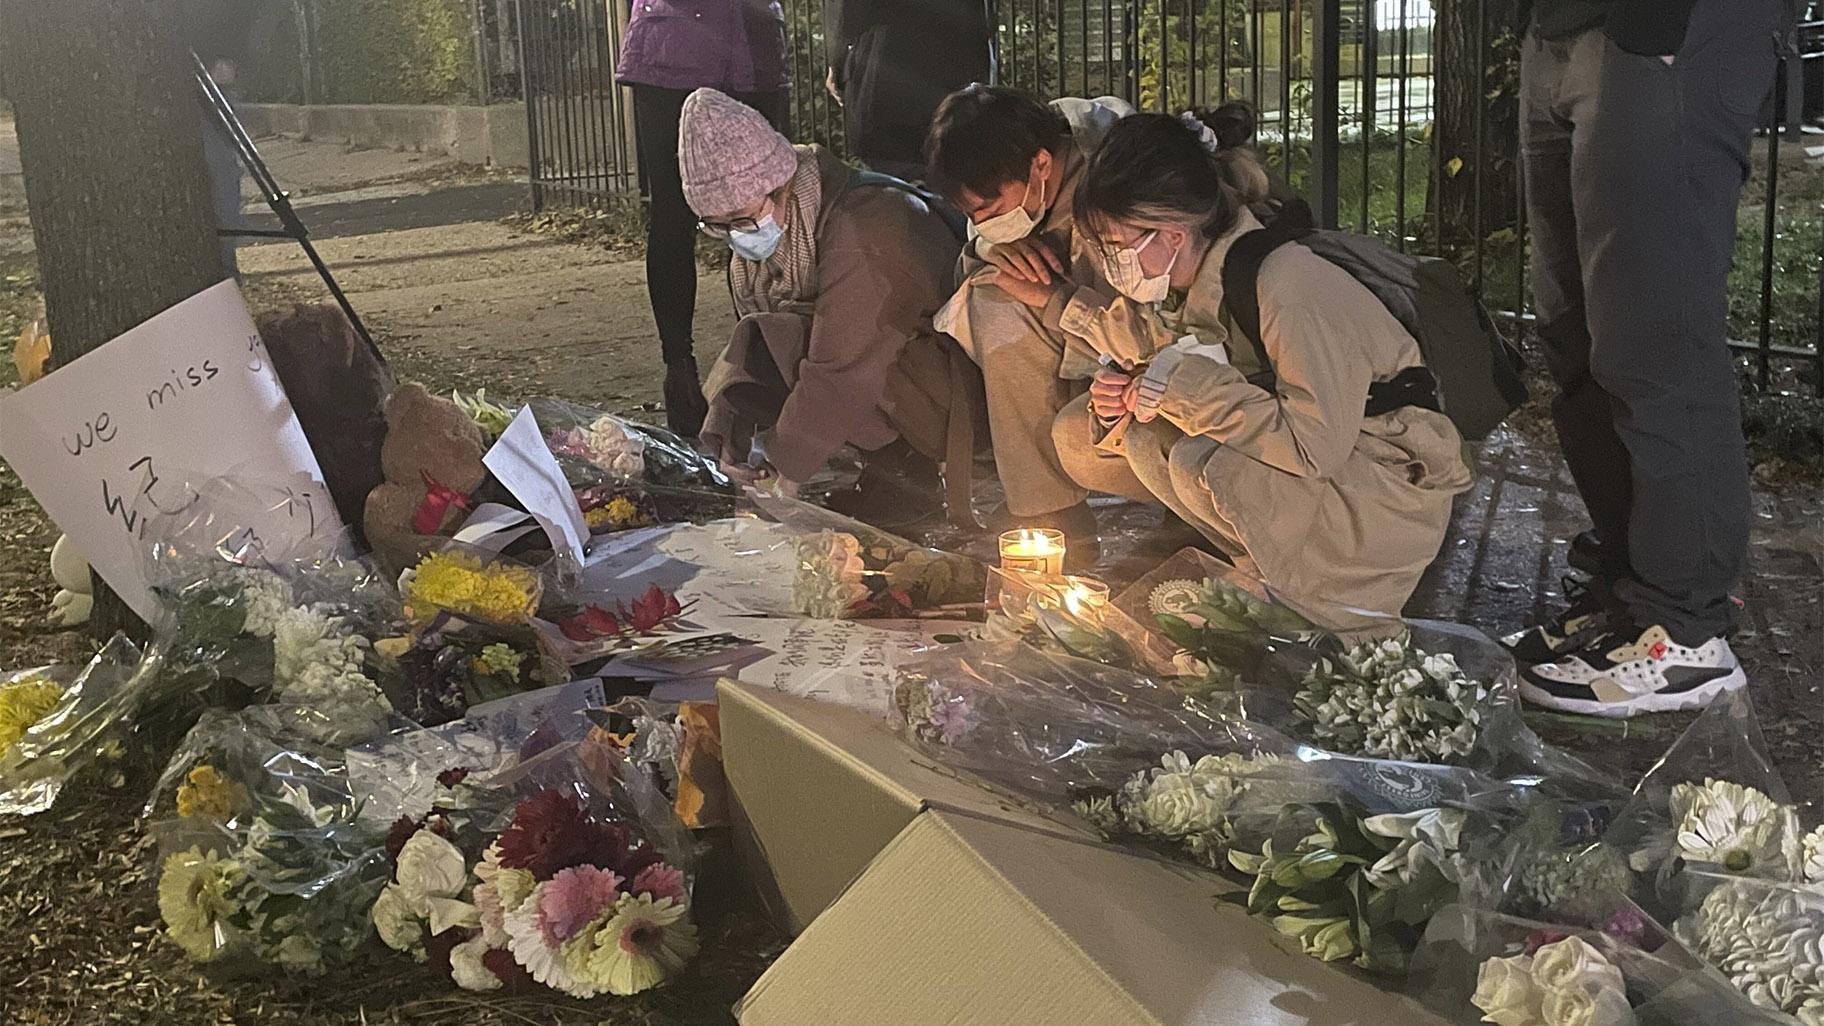 Students and friends of Shaoxiong "Dennis" Zheng stop by a memorial on Wednesday, Nov. 10, 2021 in Chicago.  (Madeline Kenney / Chicago Sun-Times via AP)